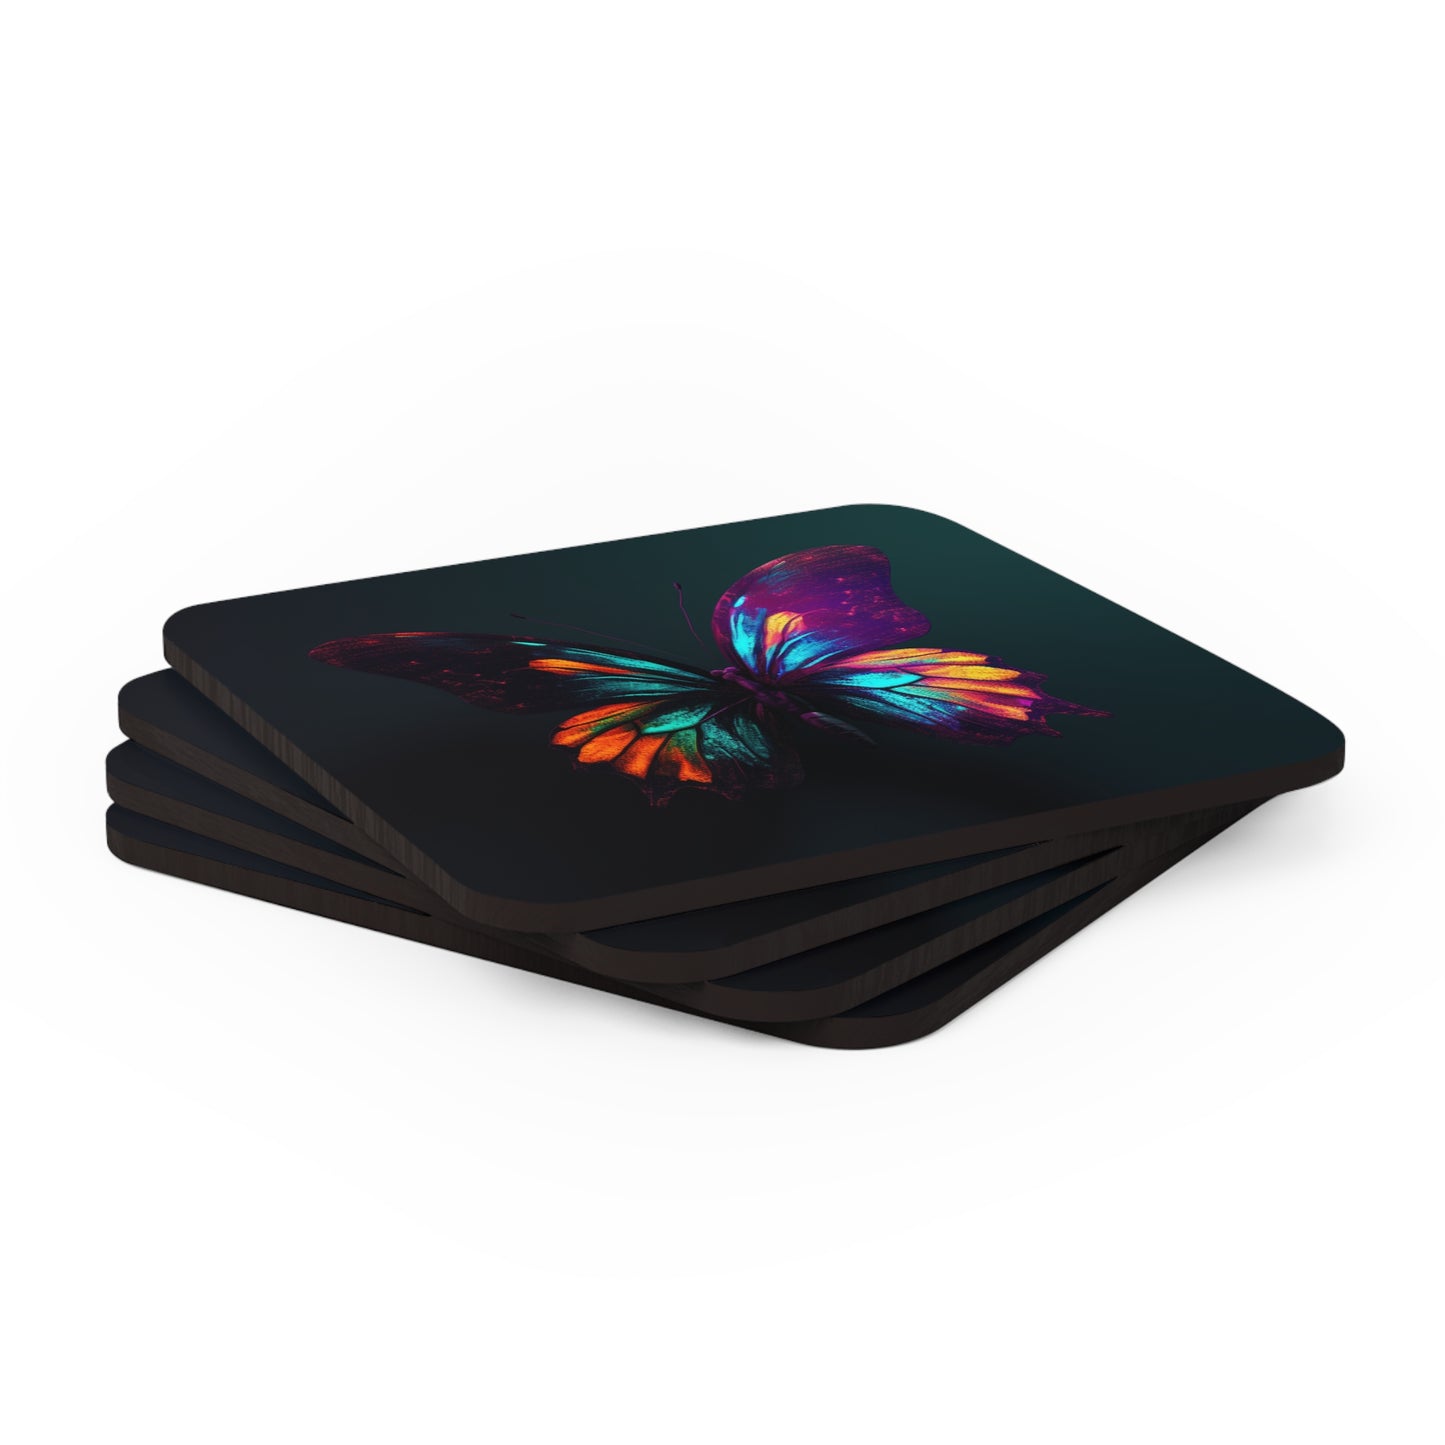 Corkwood Coaster Set Hyper Colorful Butterfly Macro 4